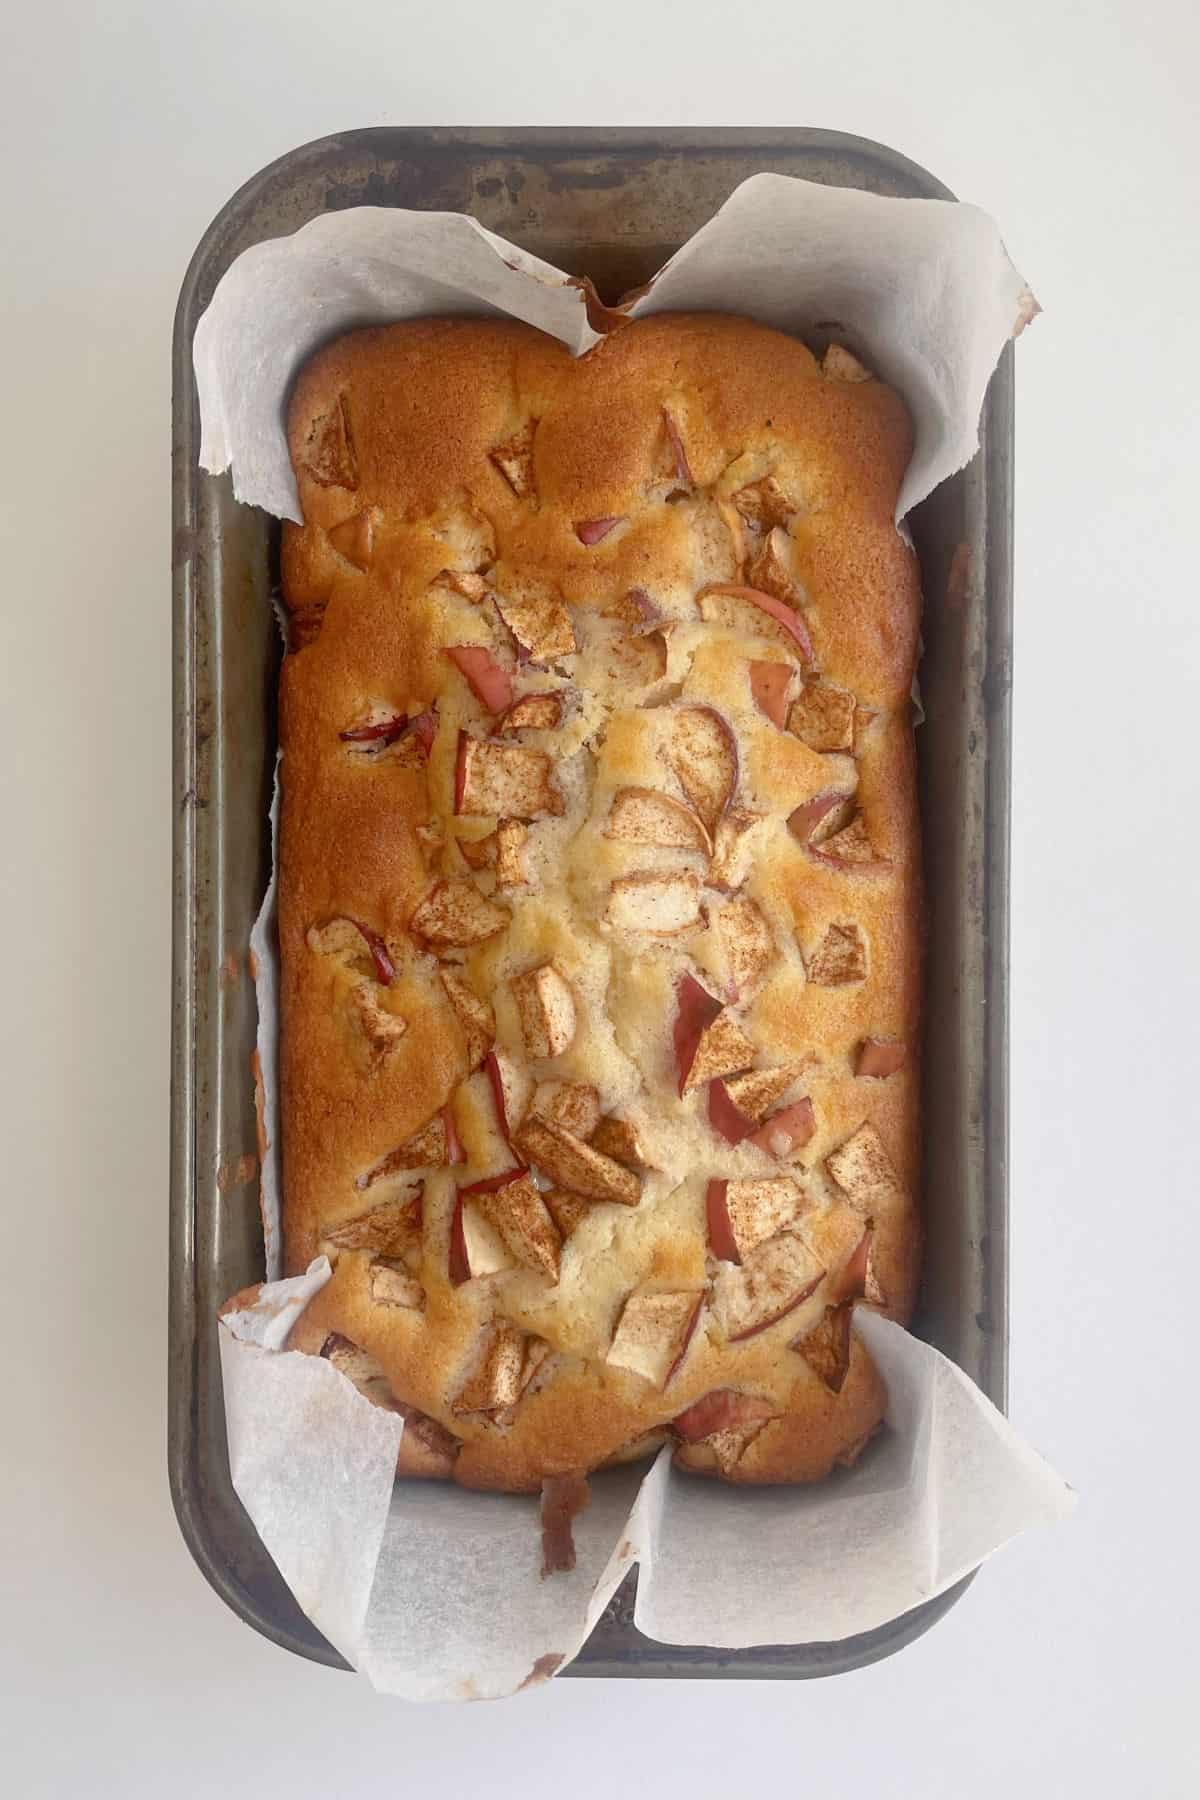 Apple loaf straight from the oven in baking dish.